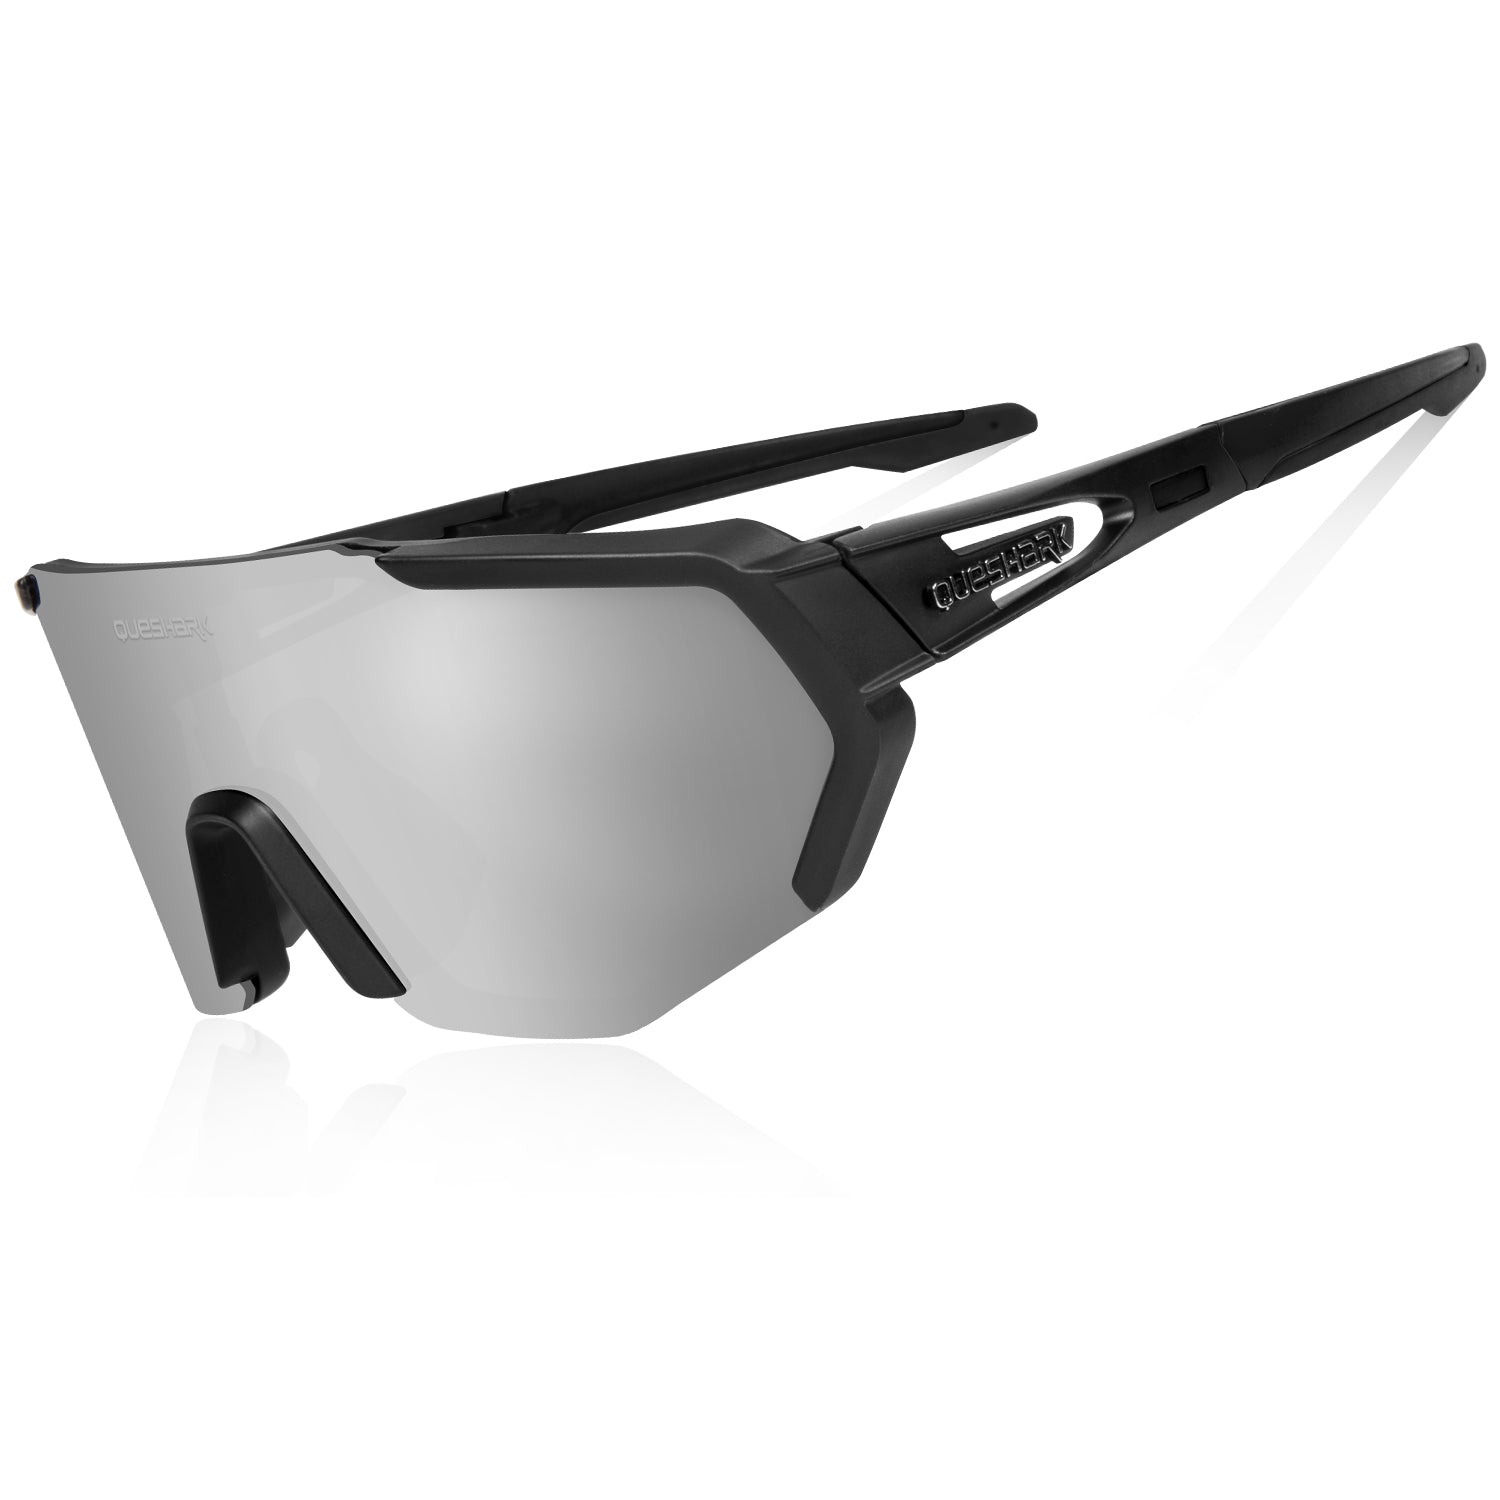 Queshark Outdoor Sports Cycling Glasses Polarized For Men Women 5 